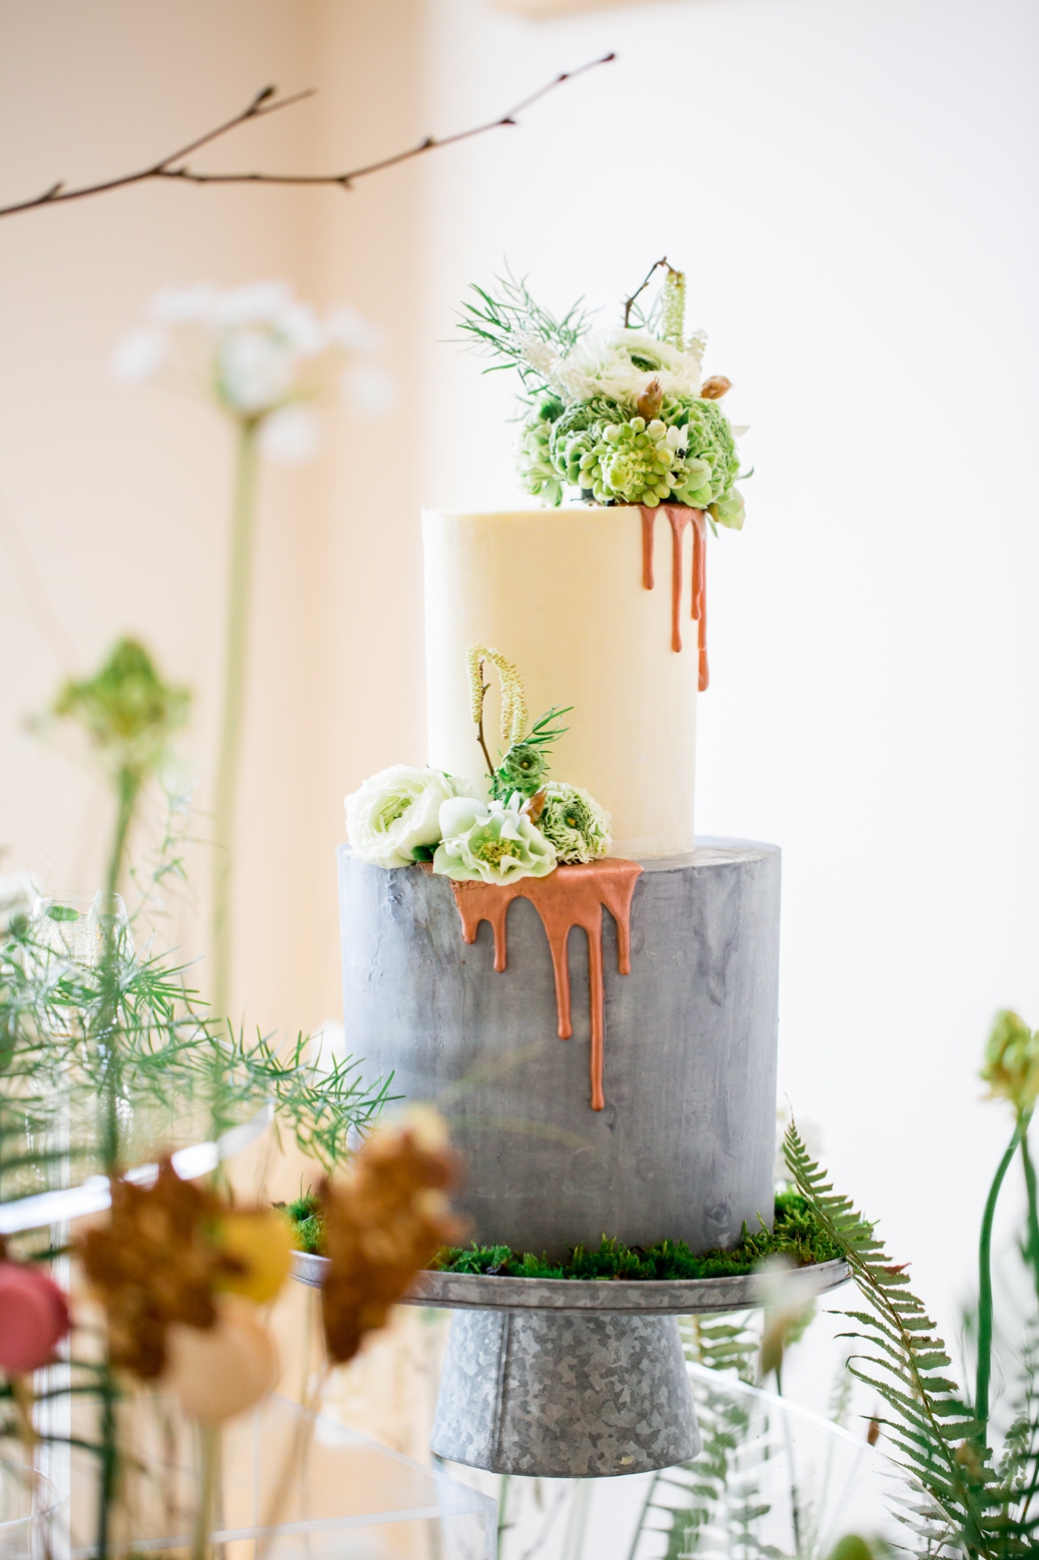 The wedding cake was a concrete-inspired one, with matte layers, drip icing and fresh blooms